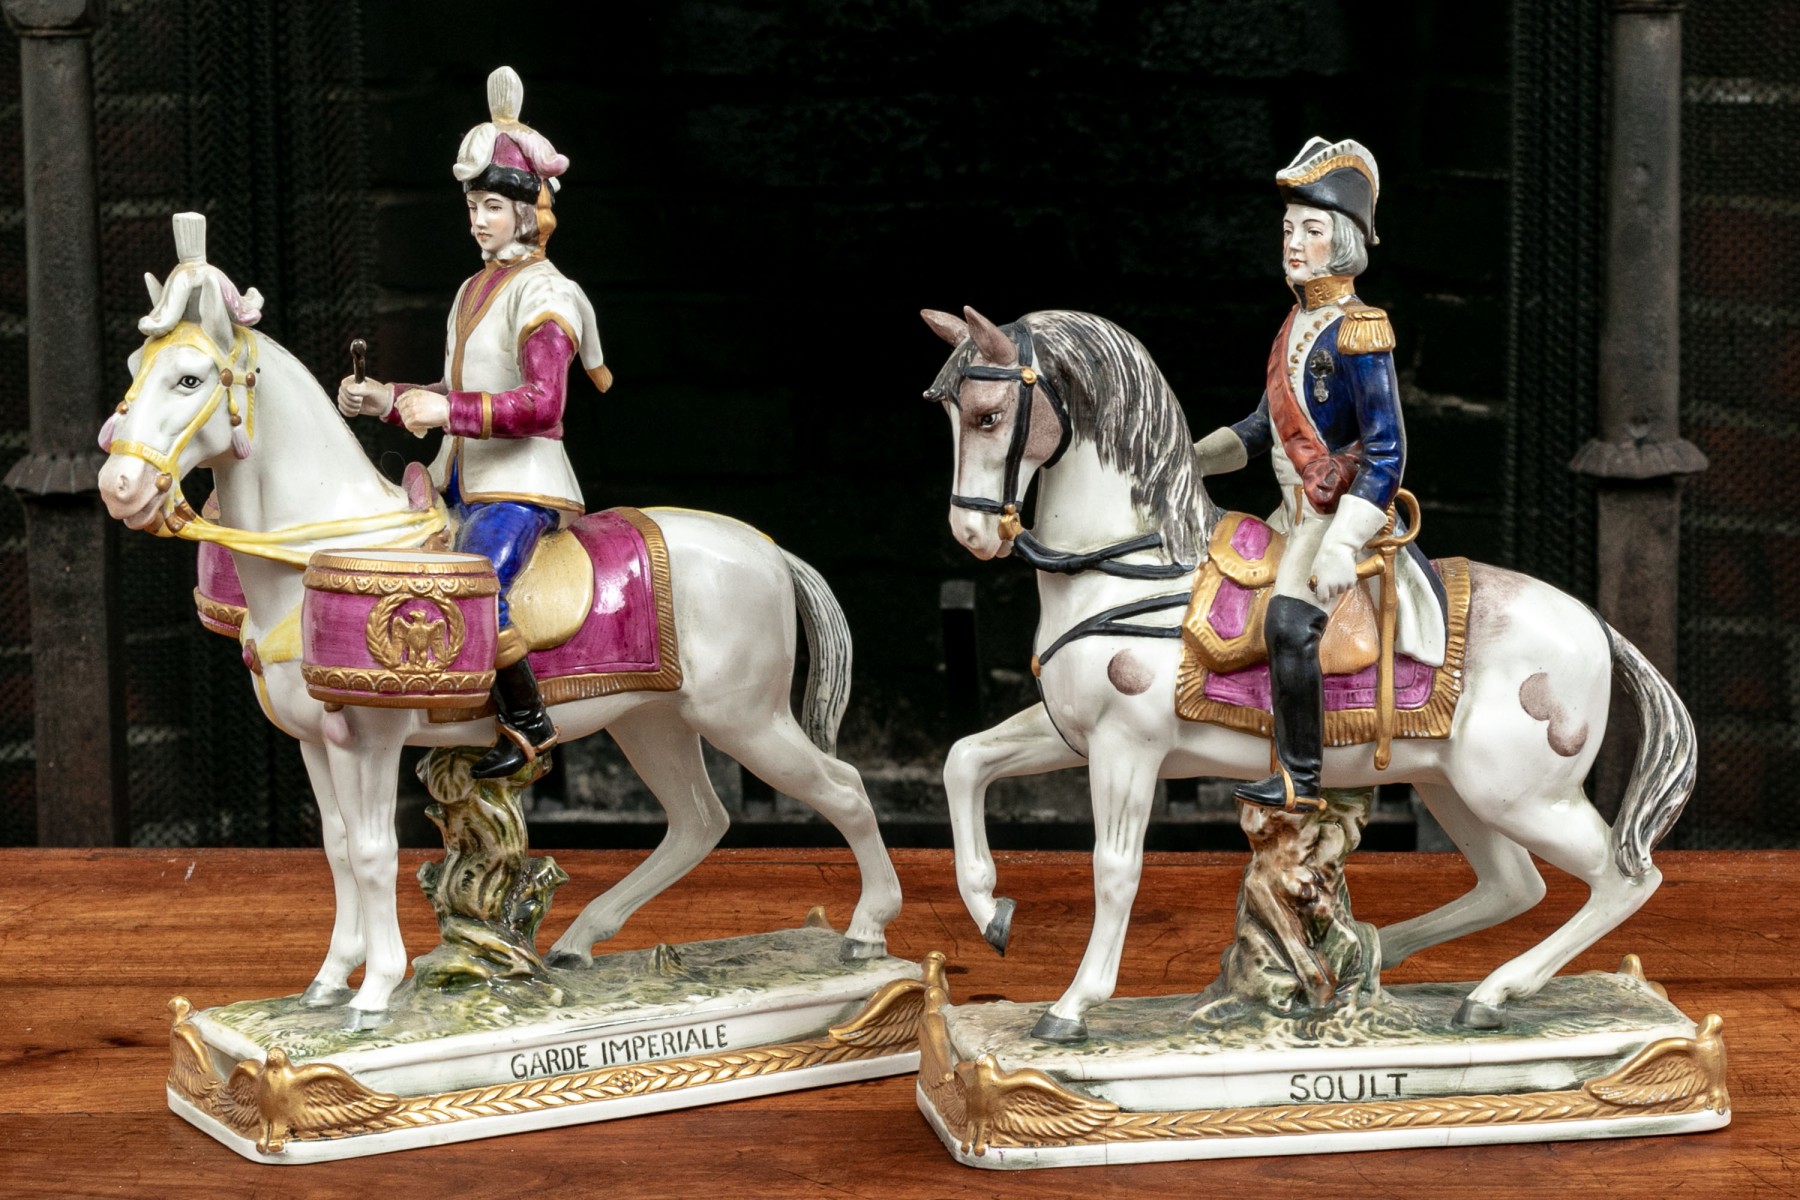 Most Valuable Porcelain Figurines & How to Spot Them